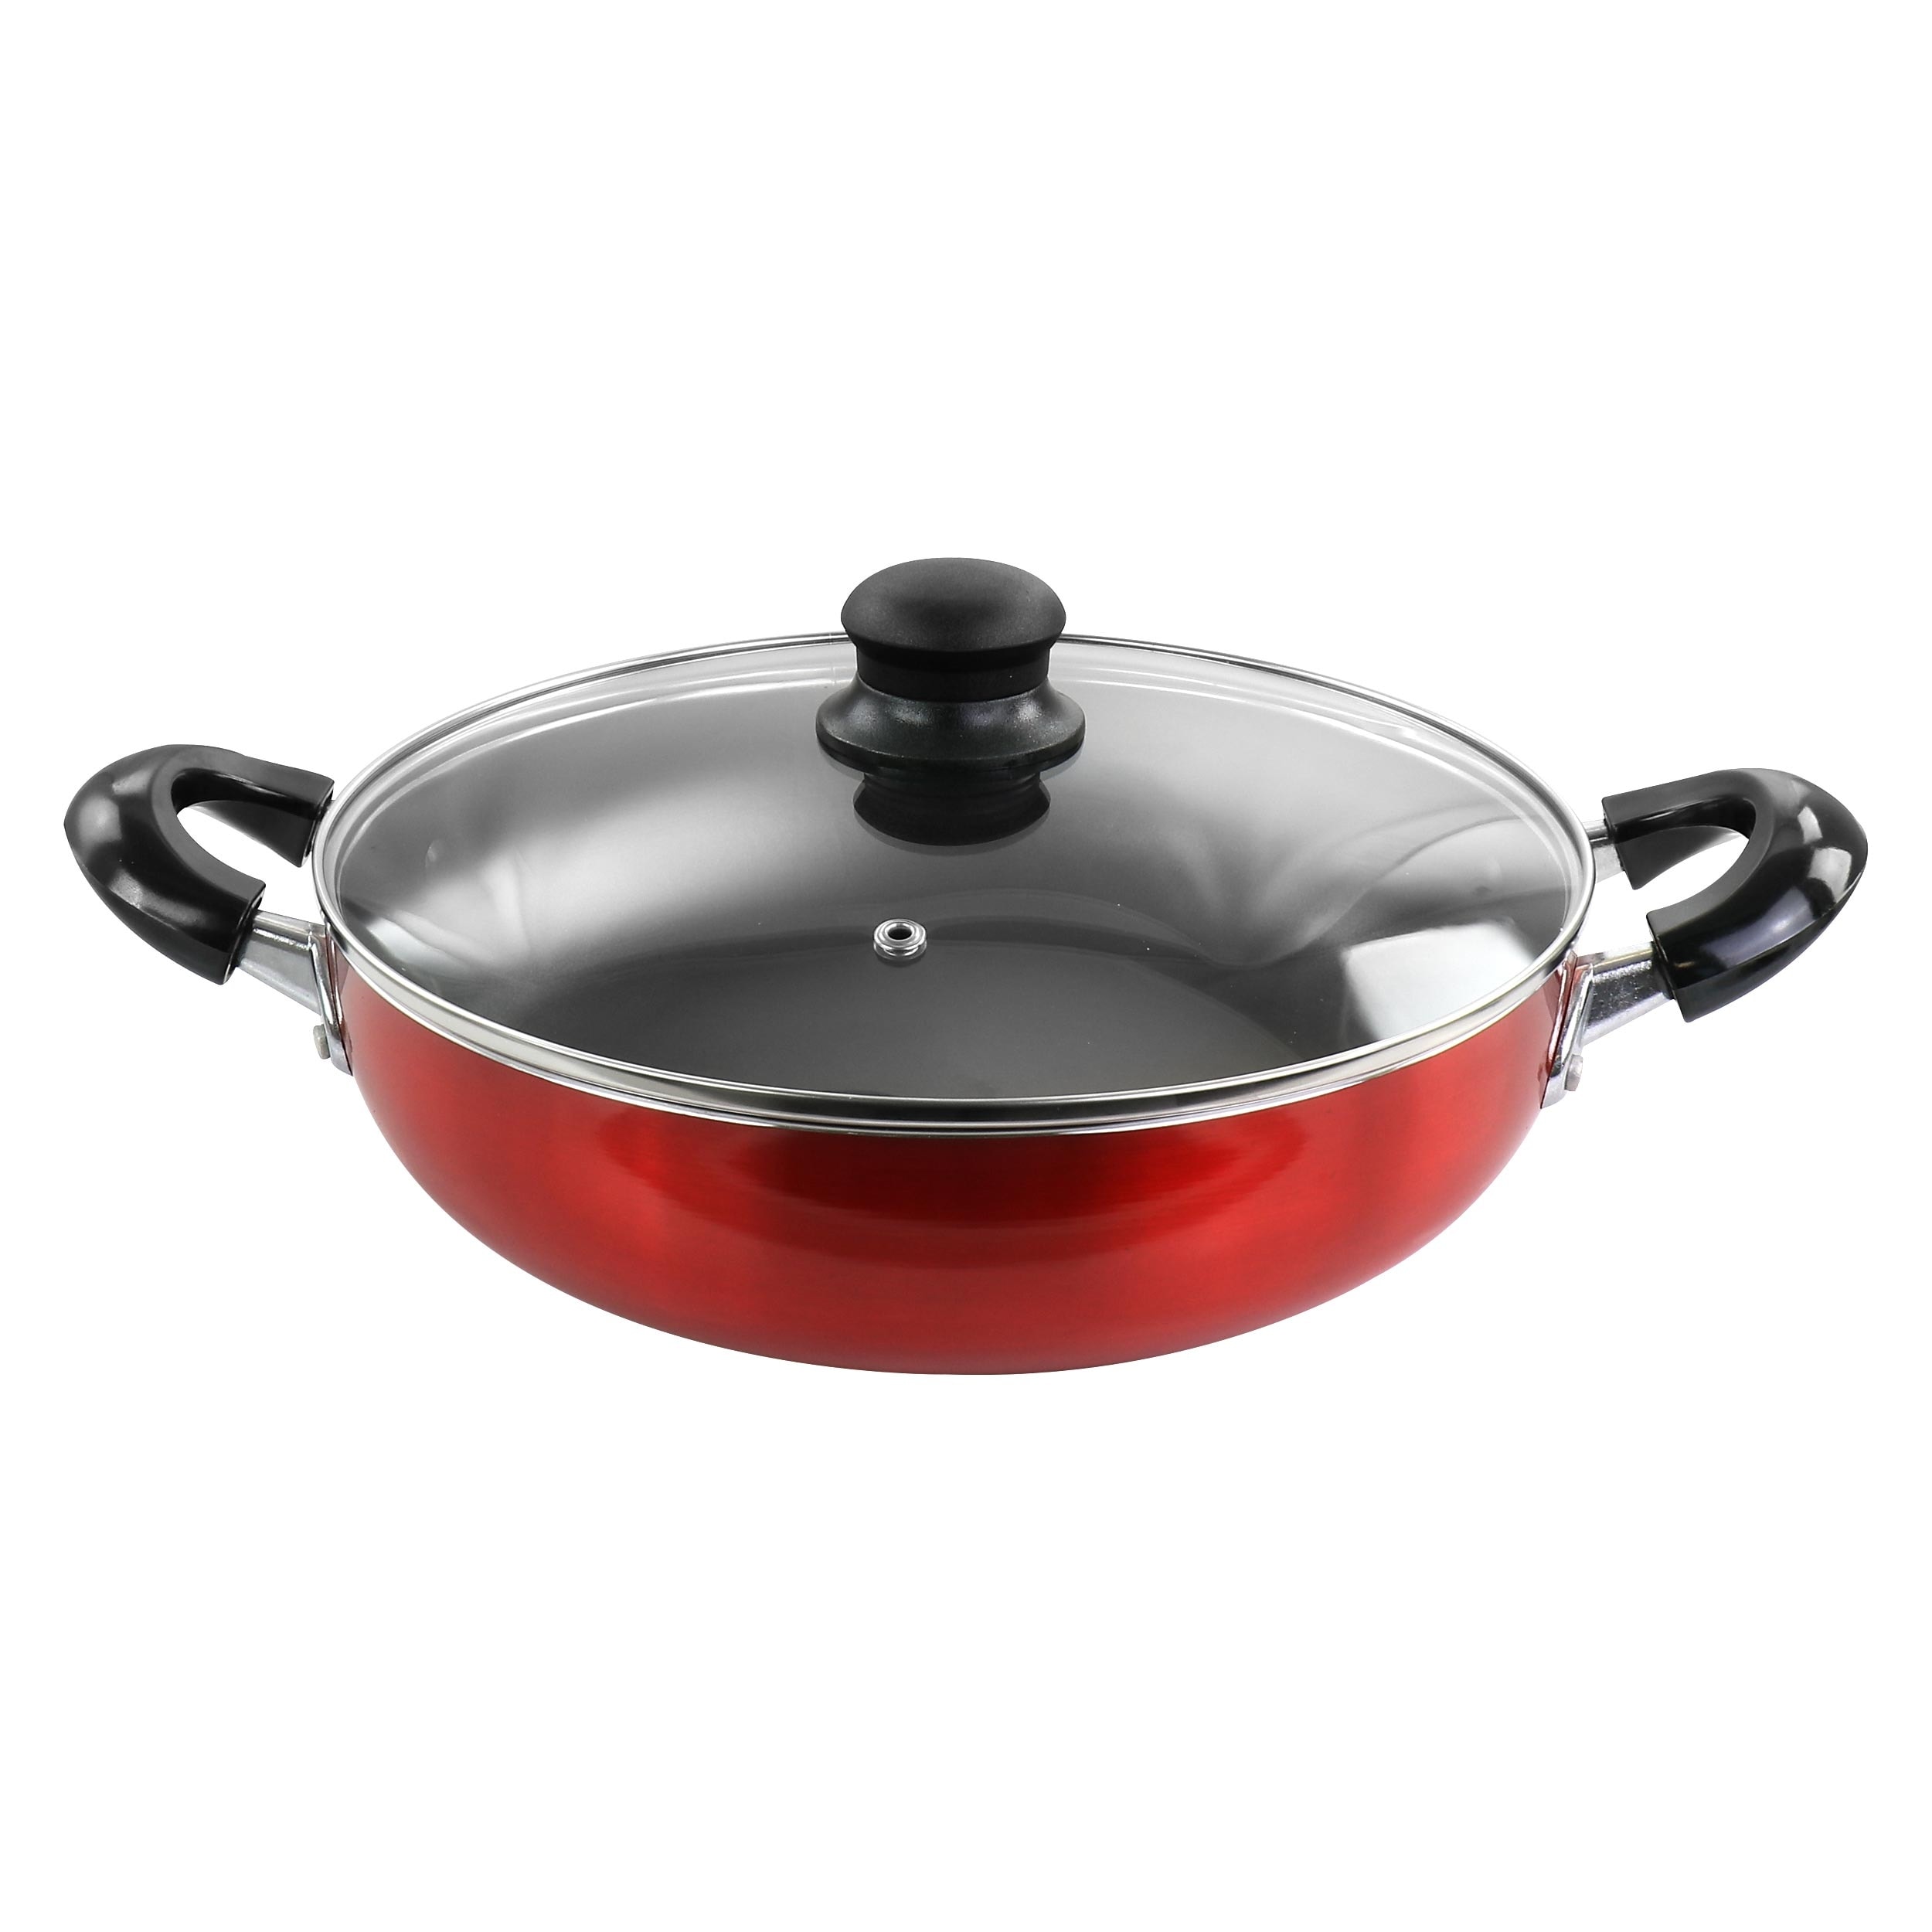 https://ak1.ostkcdn.com/images/products/is/images/direct/dd491e37800f60f01eafc105cd864fd472ba2b69/Better-Chef-10-Inch-Red-Aluminum-Deep-Frying-Pan-with-Glass-Lid.jpg